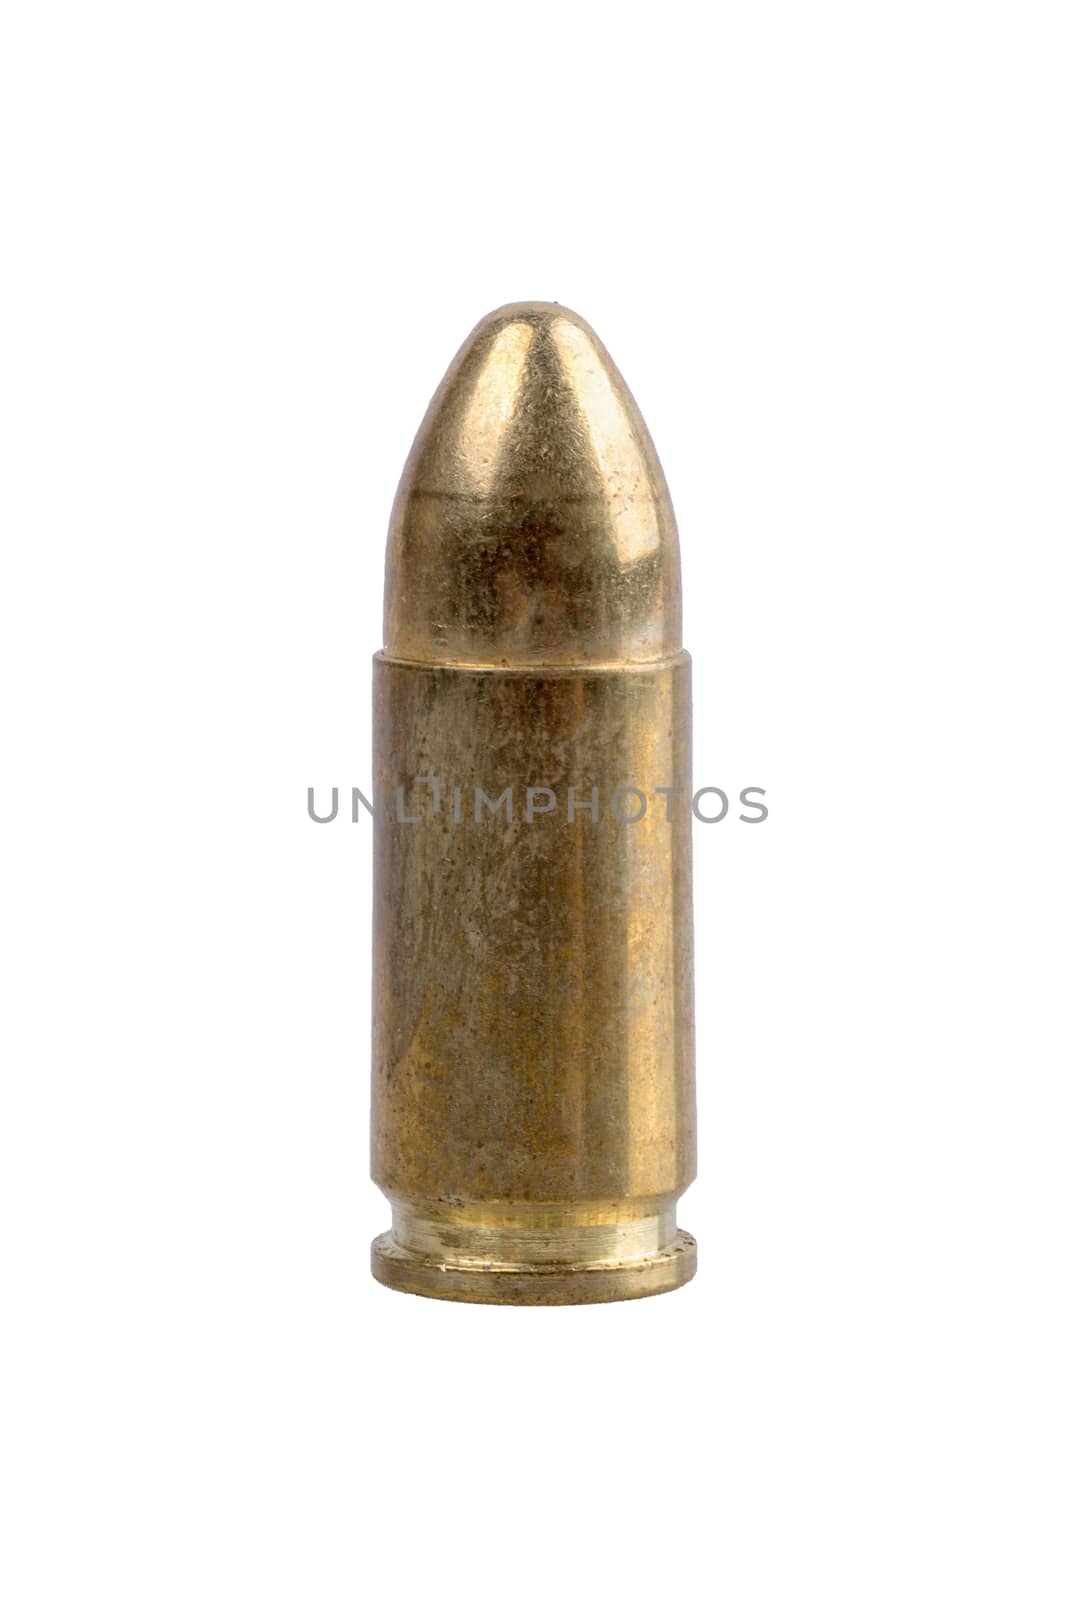 Gun bullet isolated on a white background